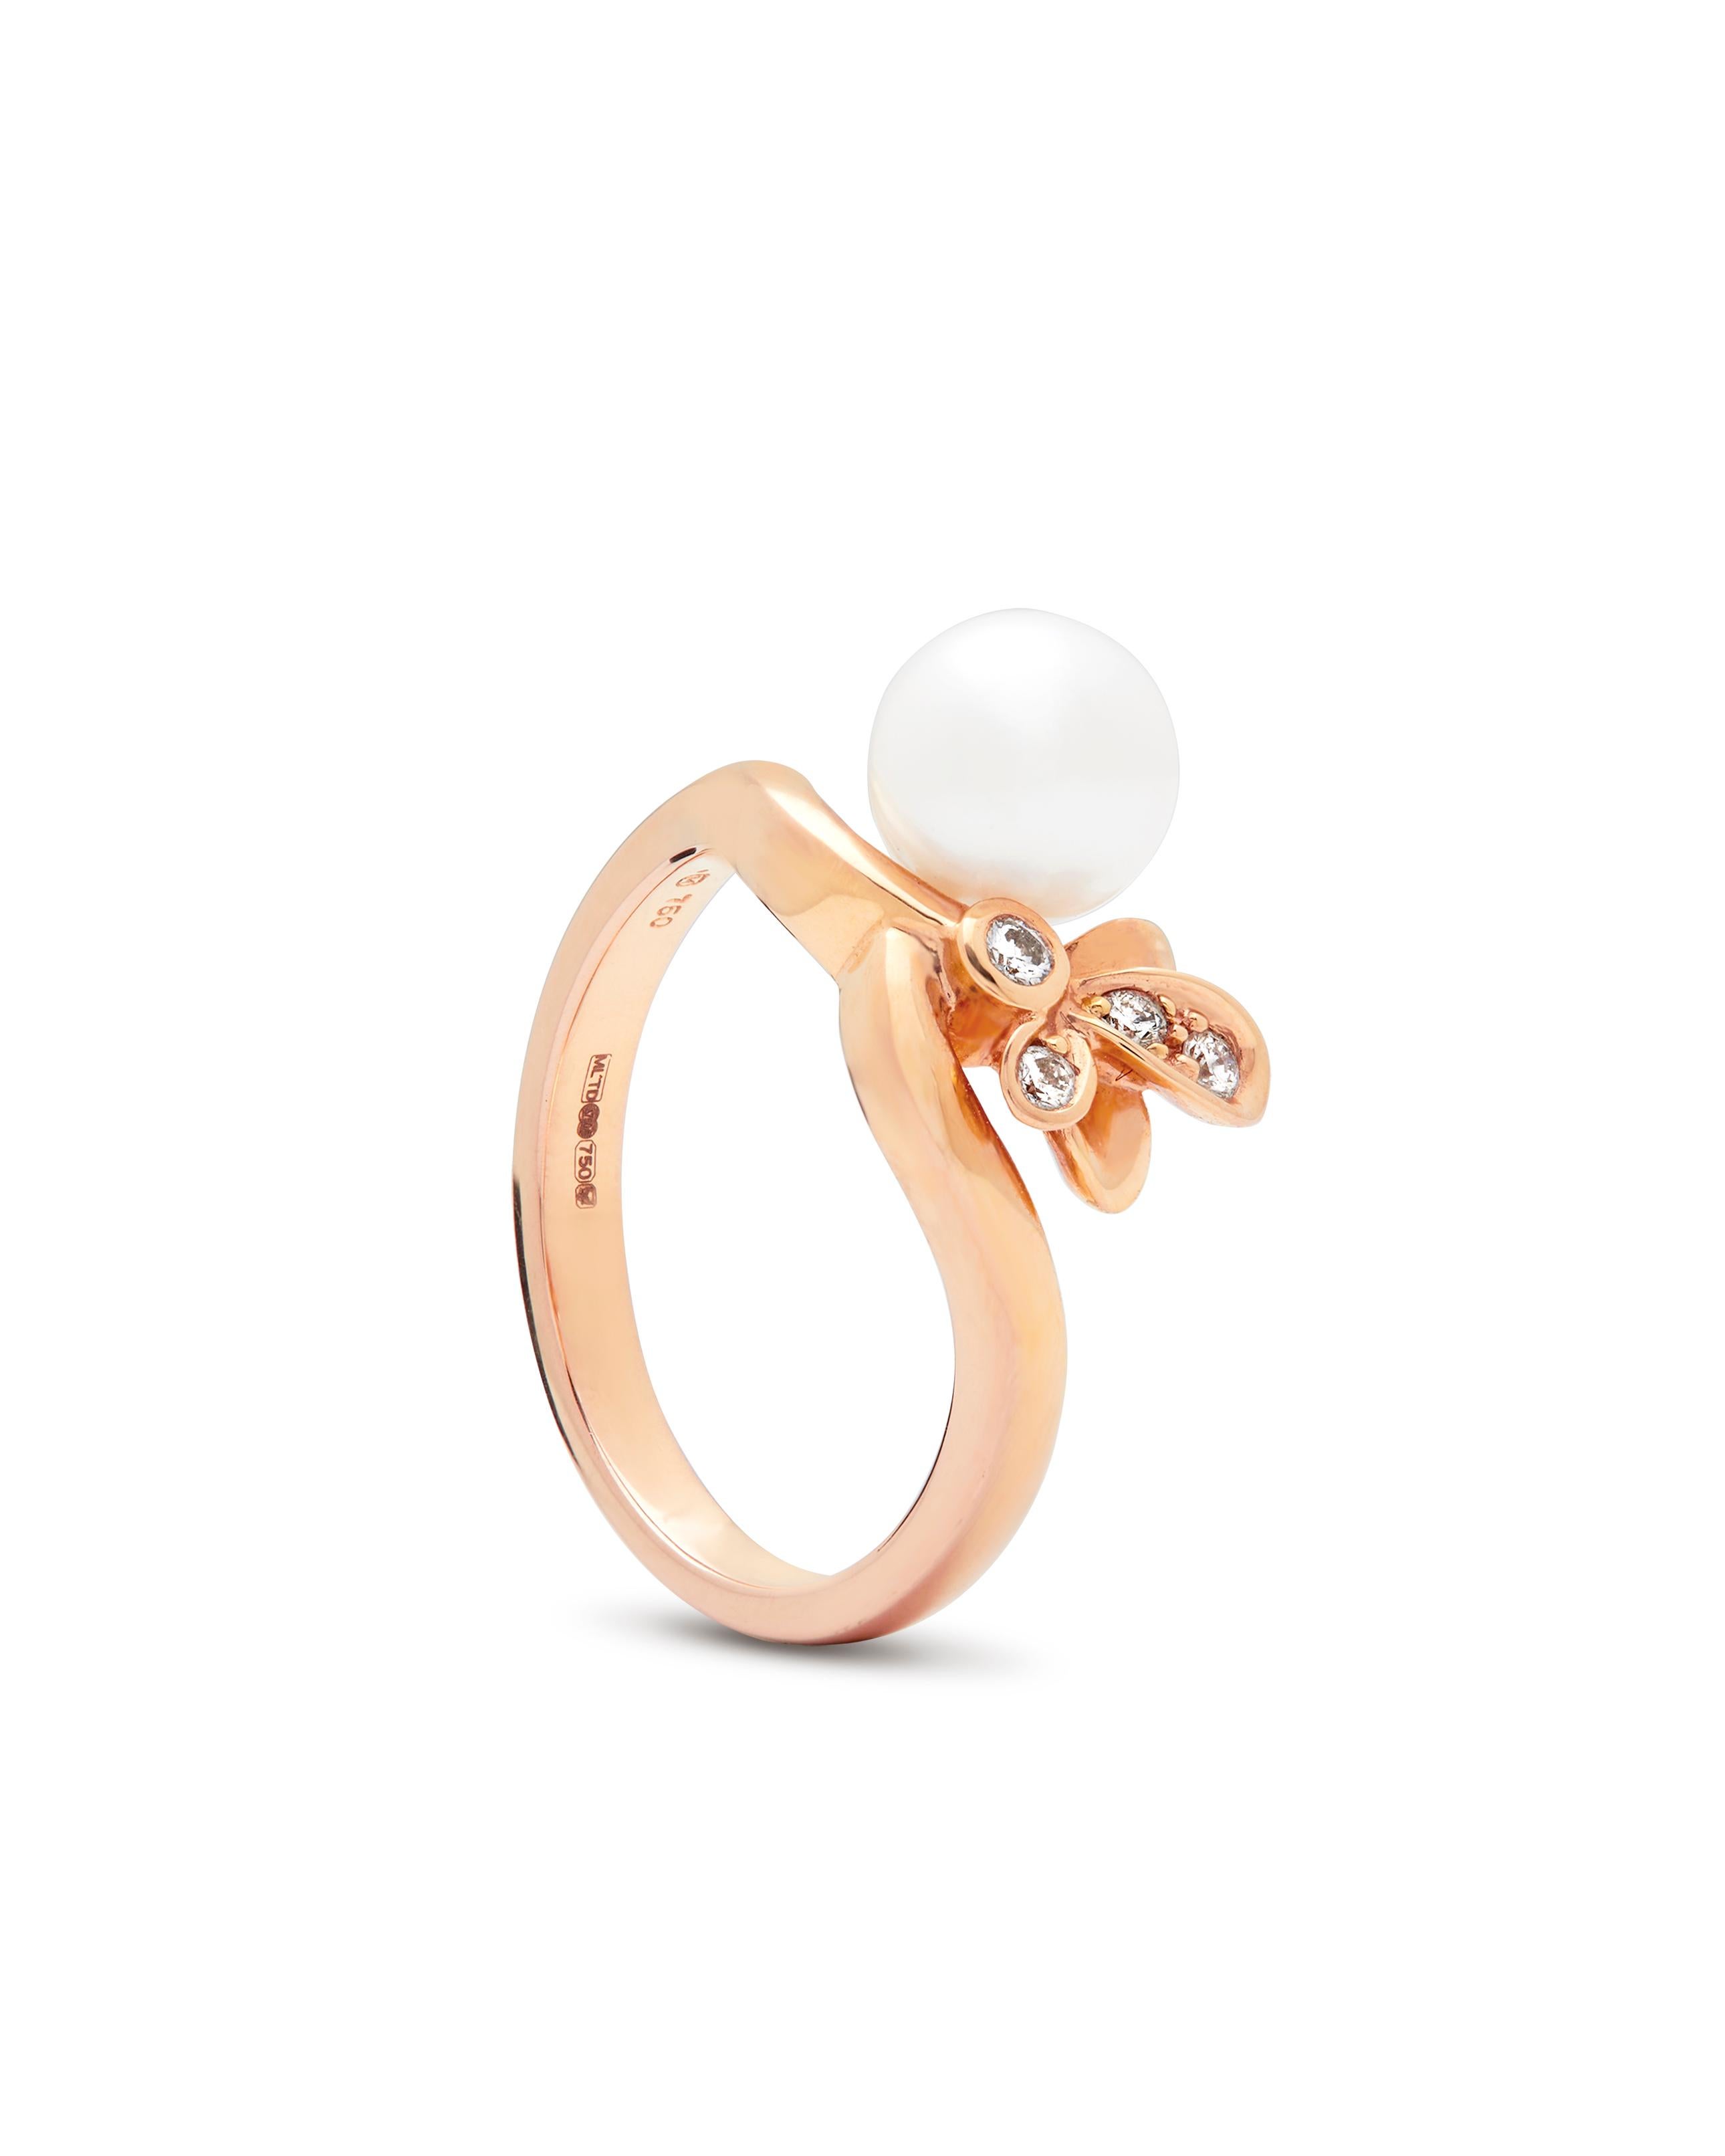 Mikimoto 'Dandelion' collection pearl & diamond ring set in 18k rose gold. 
The ring features a Akoya pearl with a slight pinkish hue set with a floral design with four round brilliant-cut diamonds 0.06 carats.  
The ring has been fully